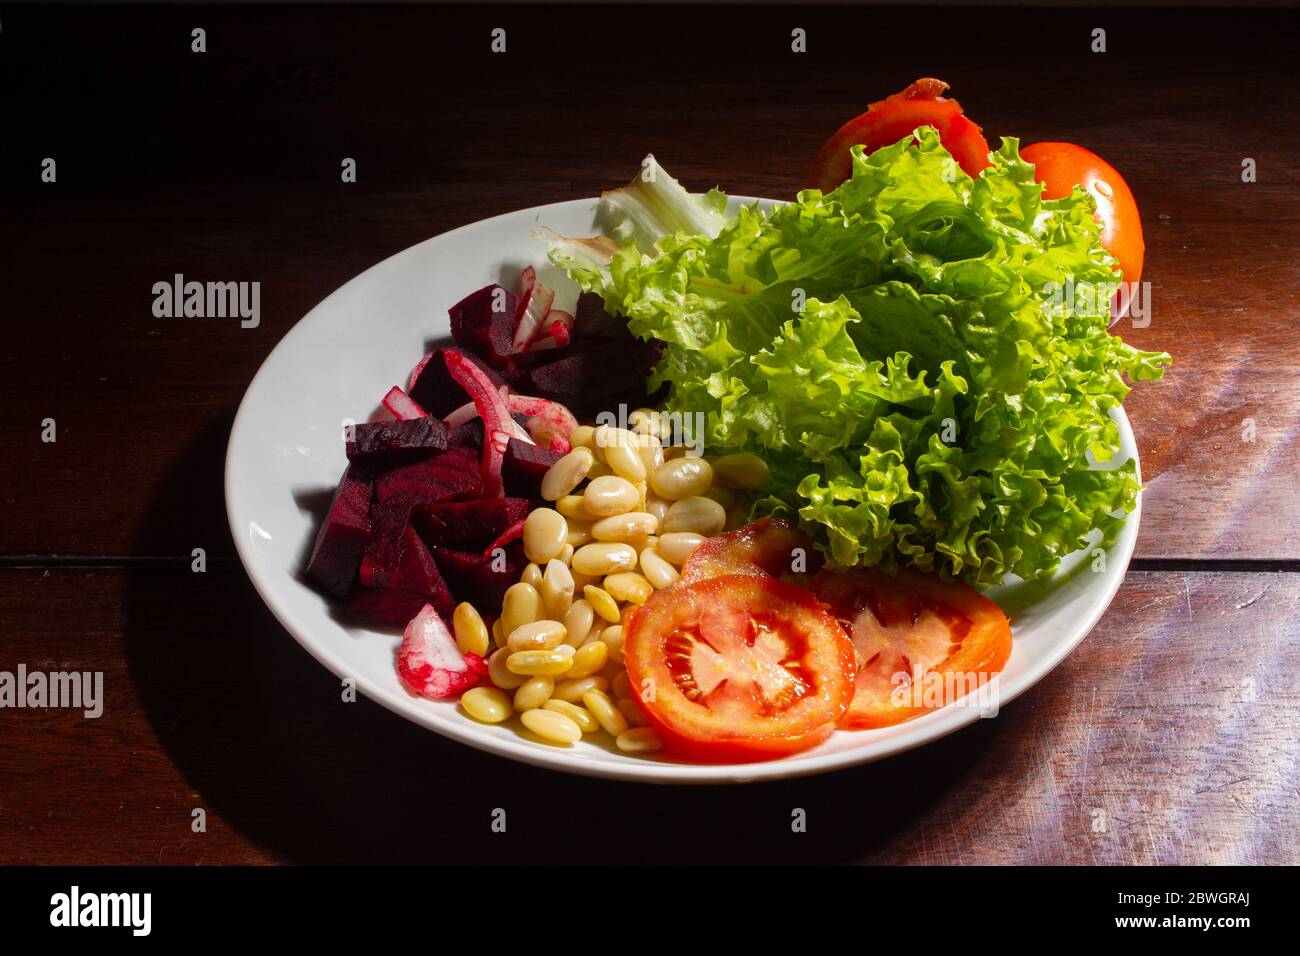 Vegan food. Plate of lettuce, beet, fava and tomato. Stock Photo